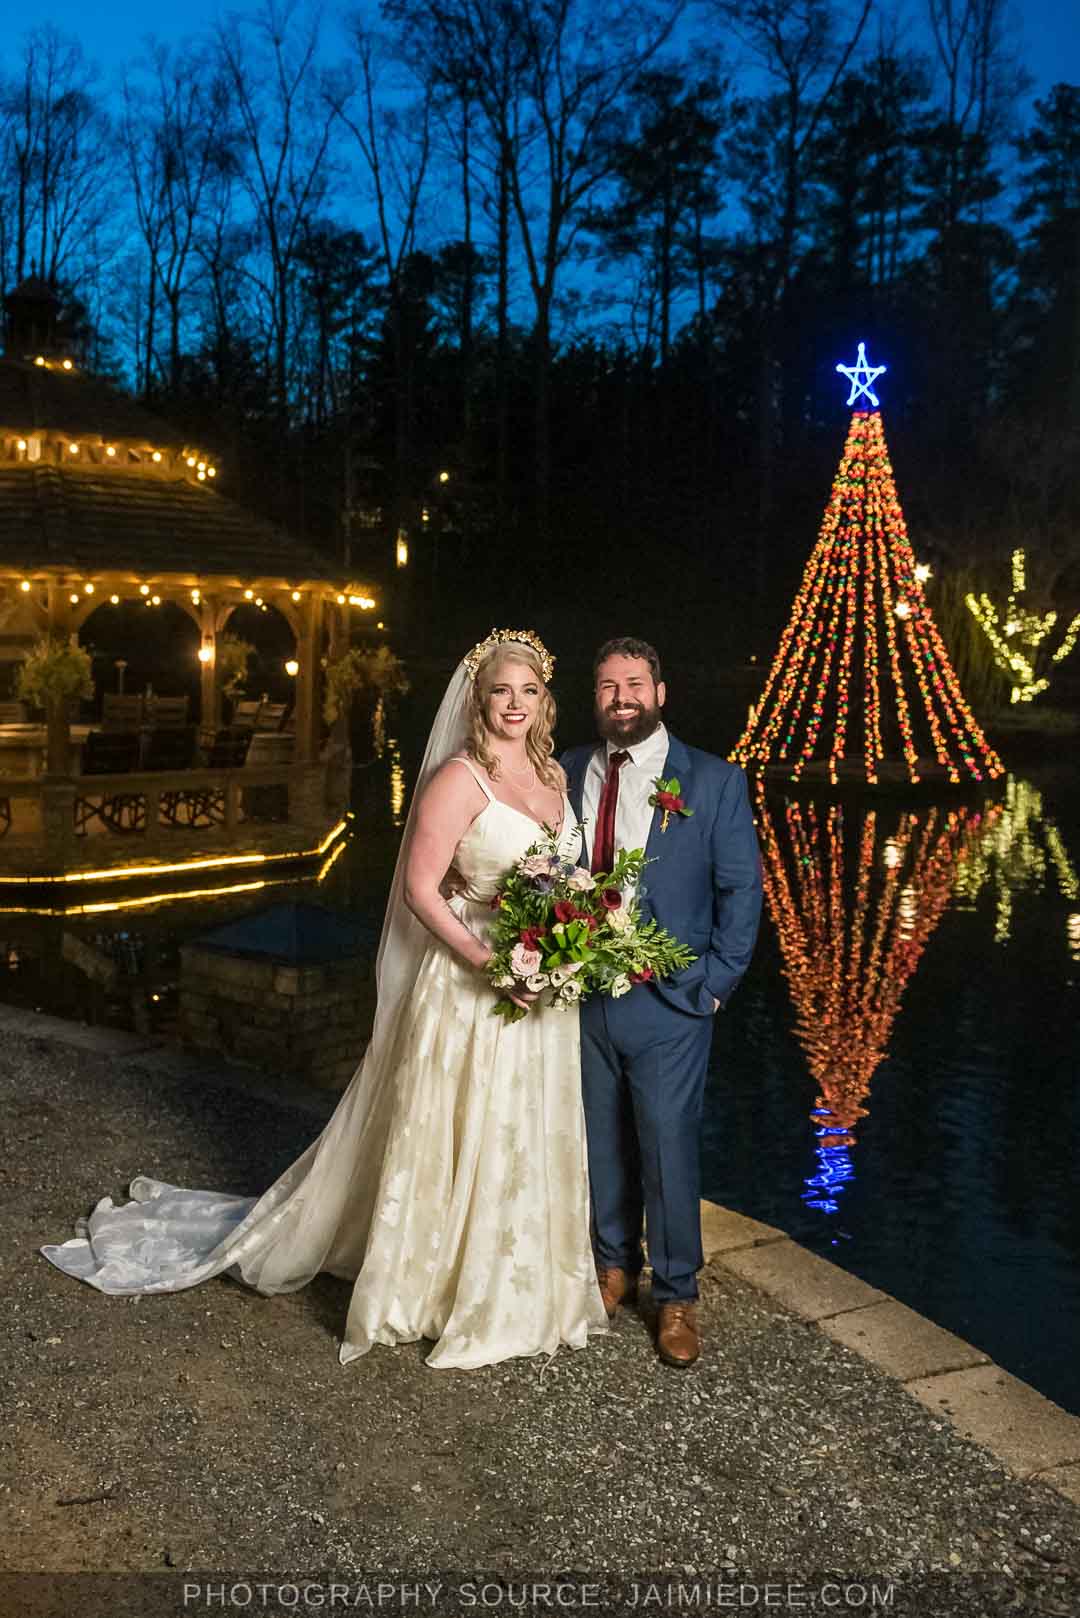 Rocky's Lake Estate Wedding Venue - bride and groom couples portrait - night time couples portraits in front of gazebo and Christmas tree